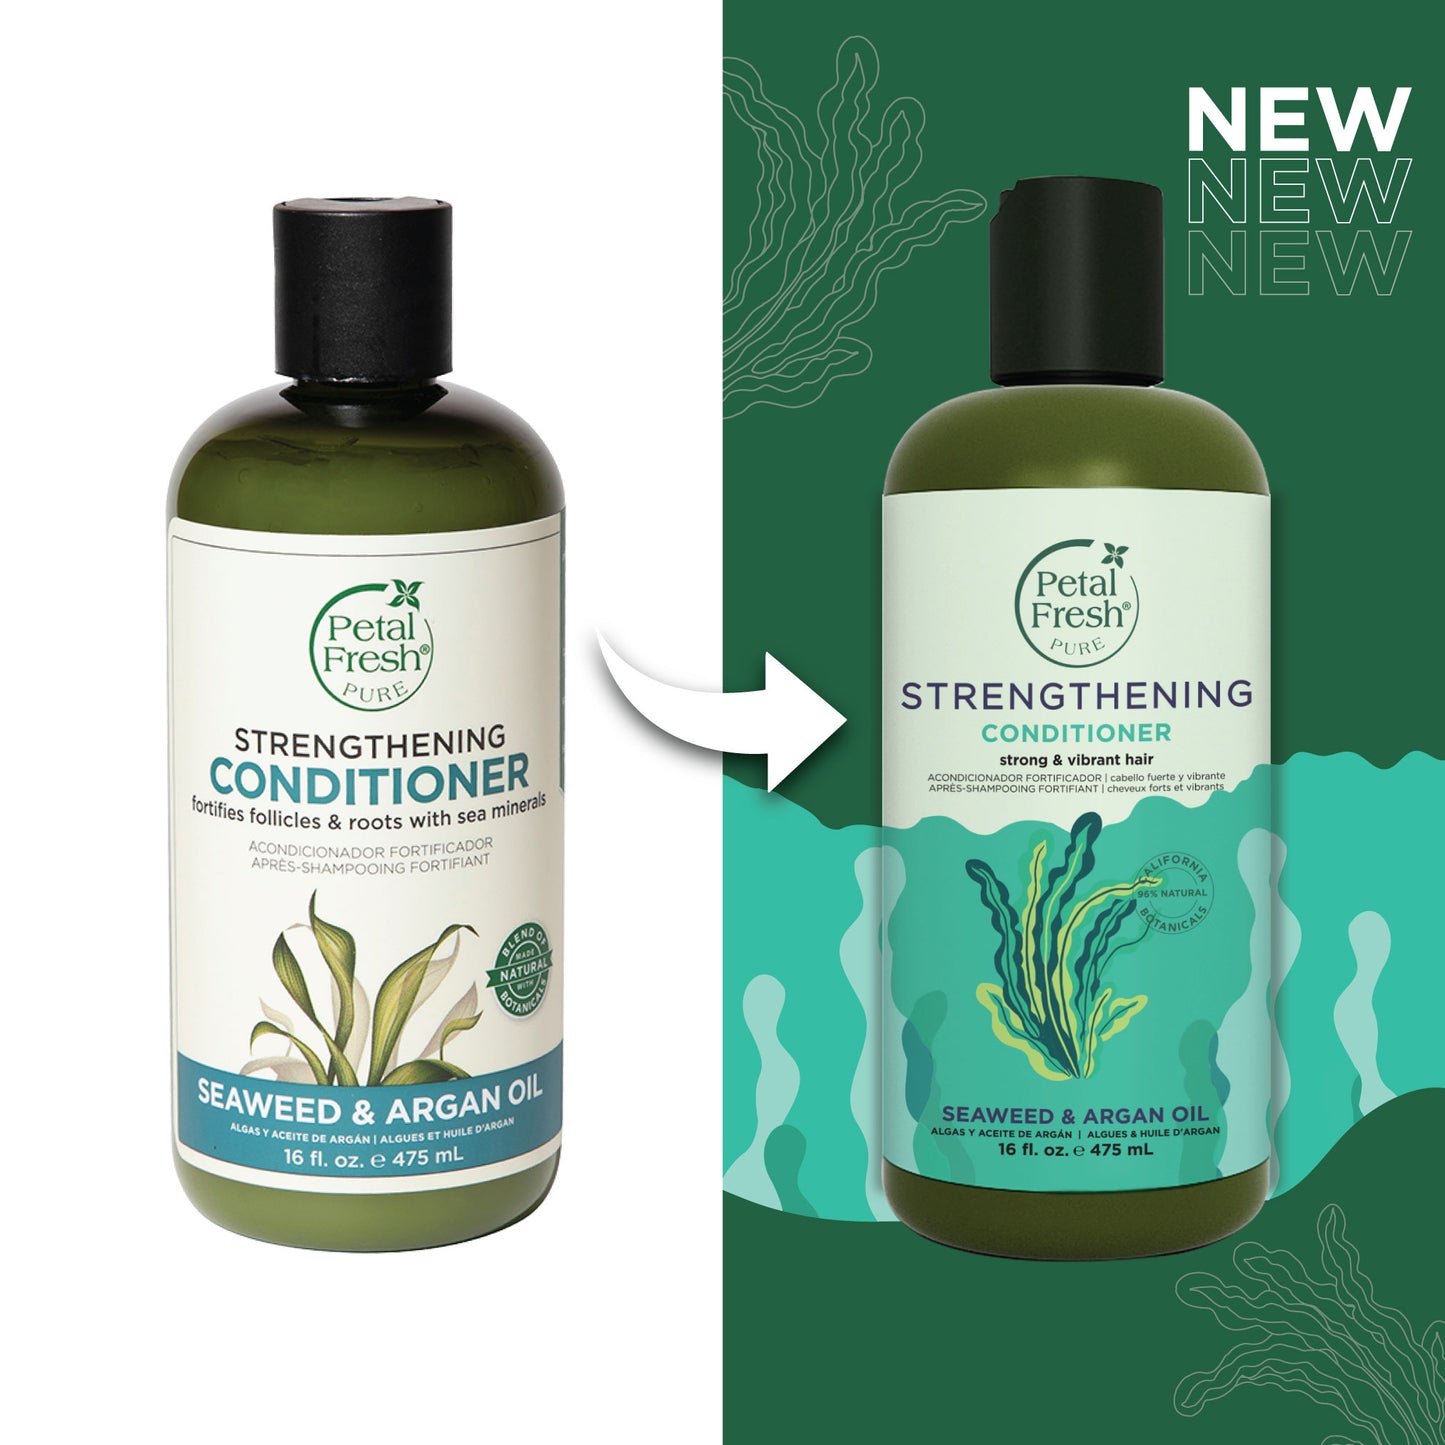 Strengthening Conditioner with Seaweed and Argan Oil